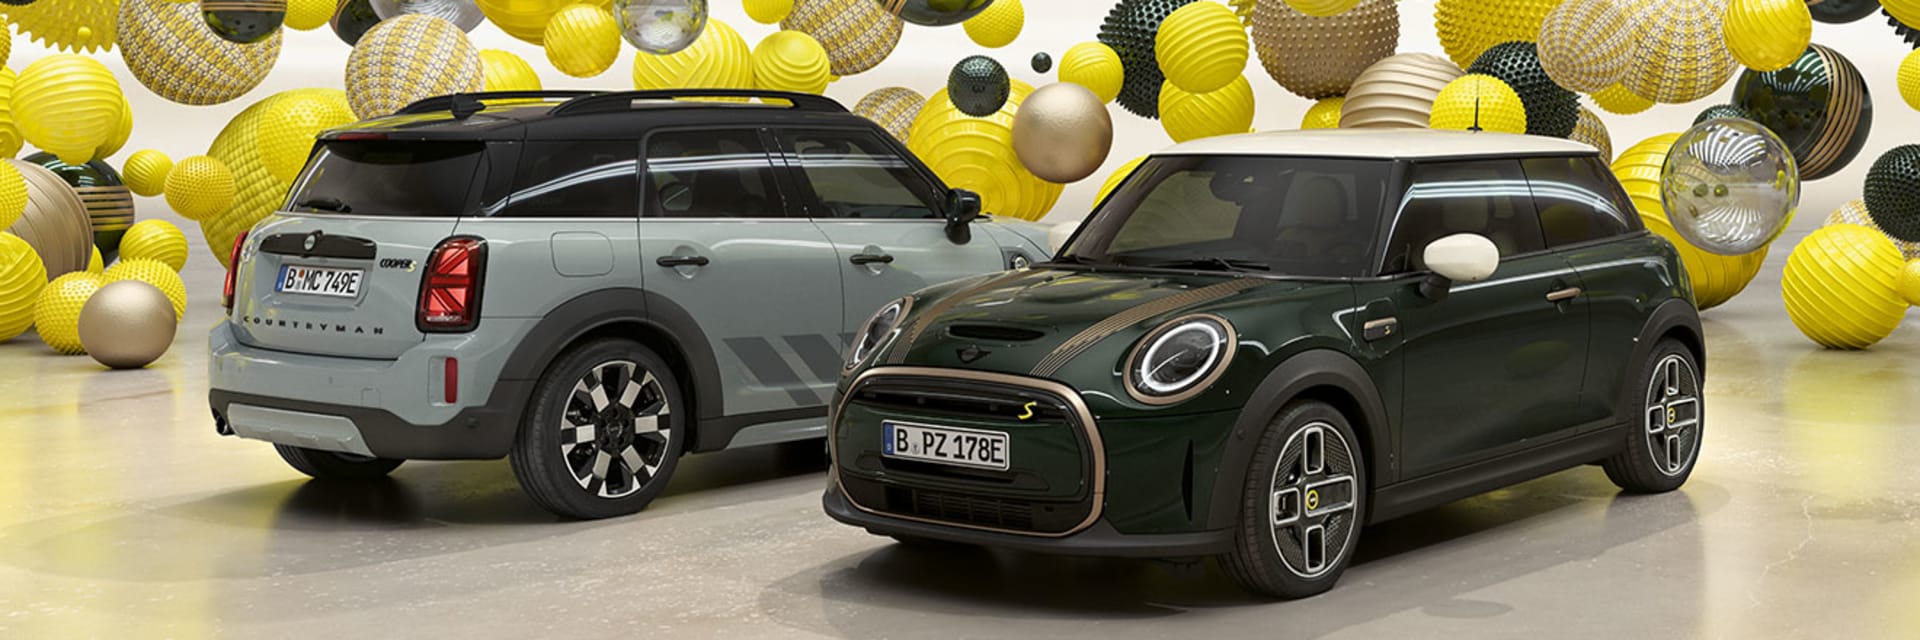 NOWE MINI SPECIAL EDITIONS